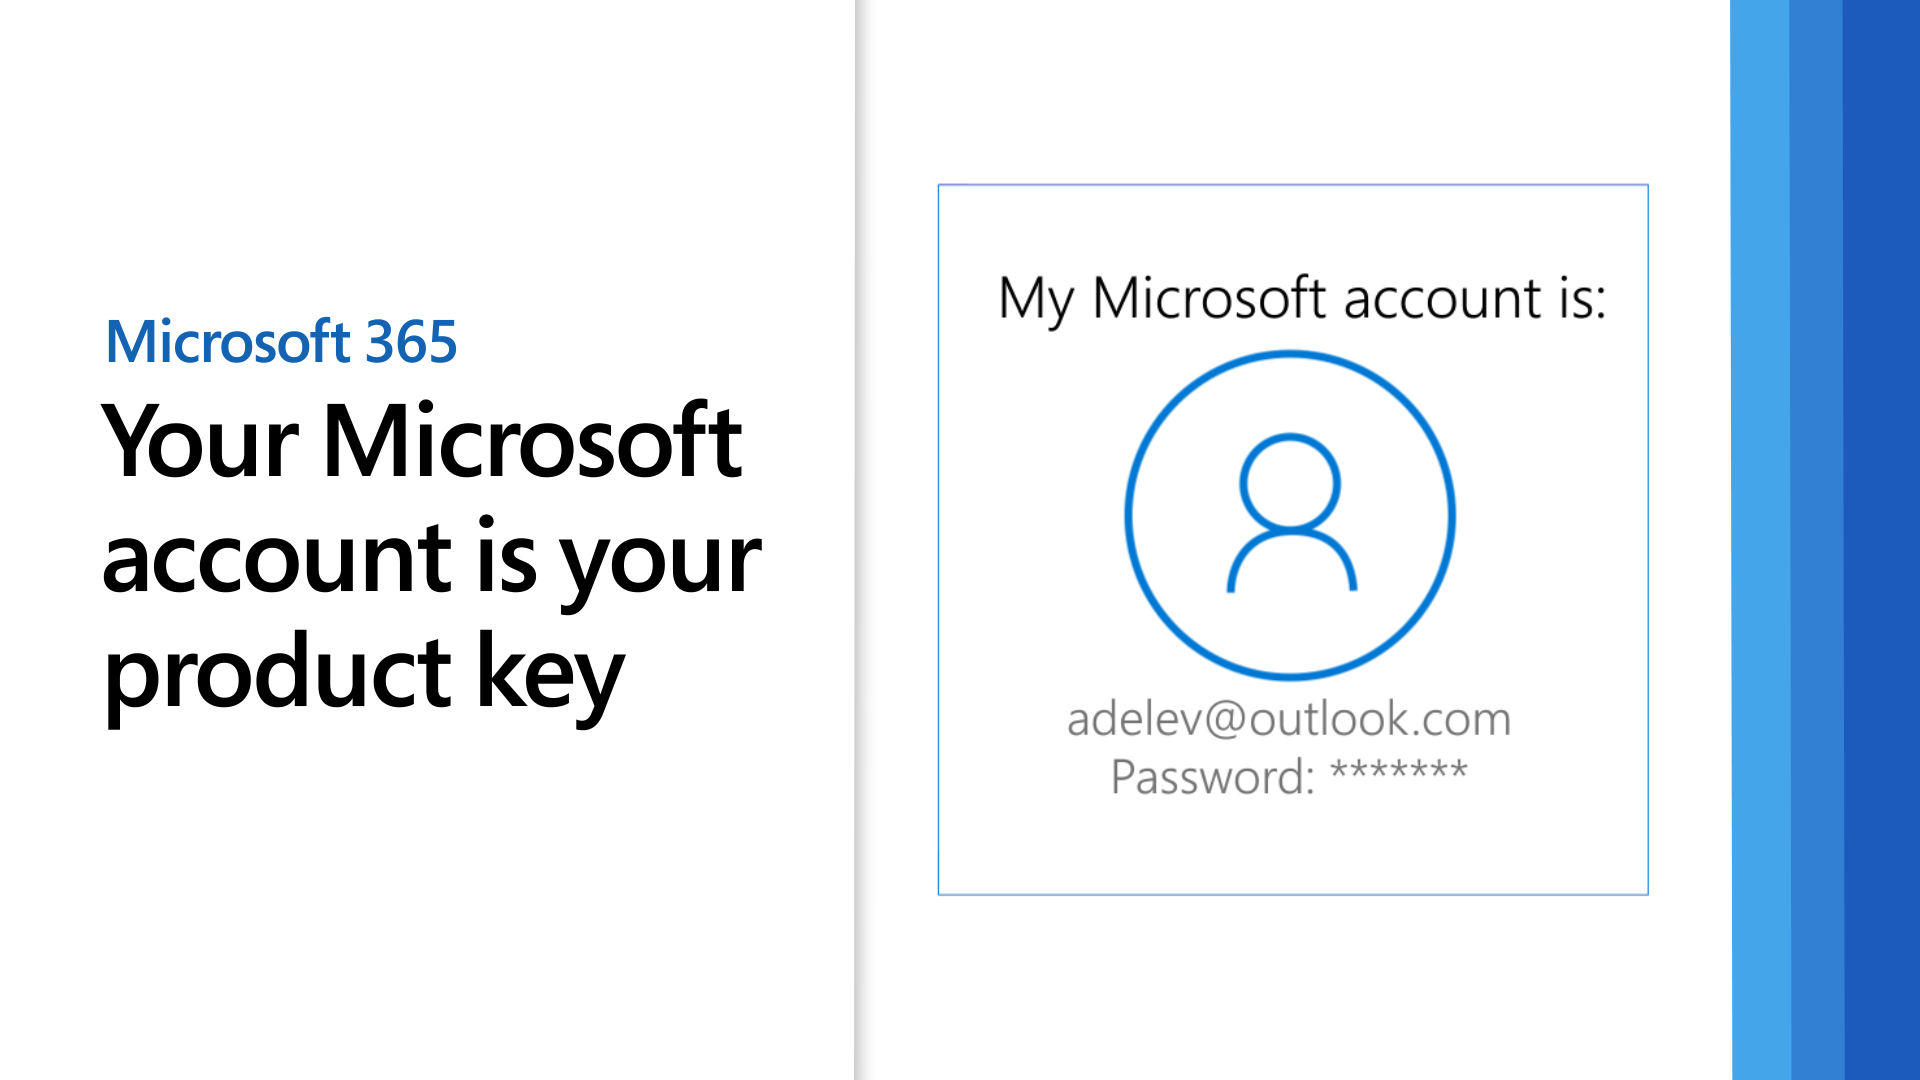 Does Office 365 come with Windows product key?